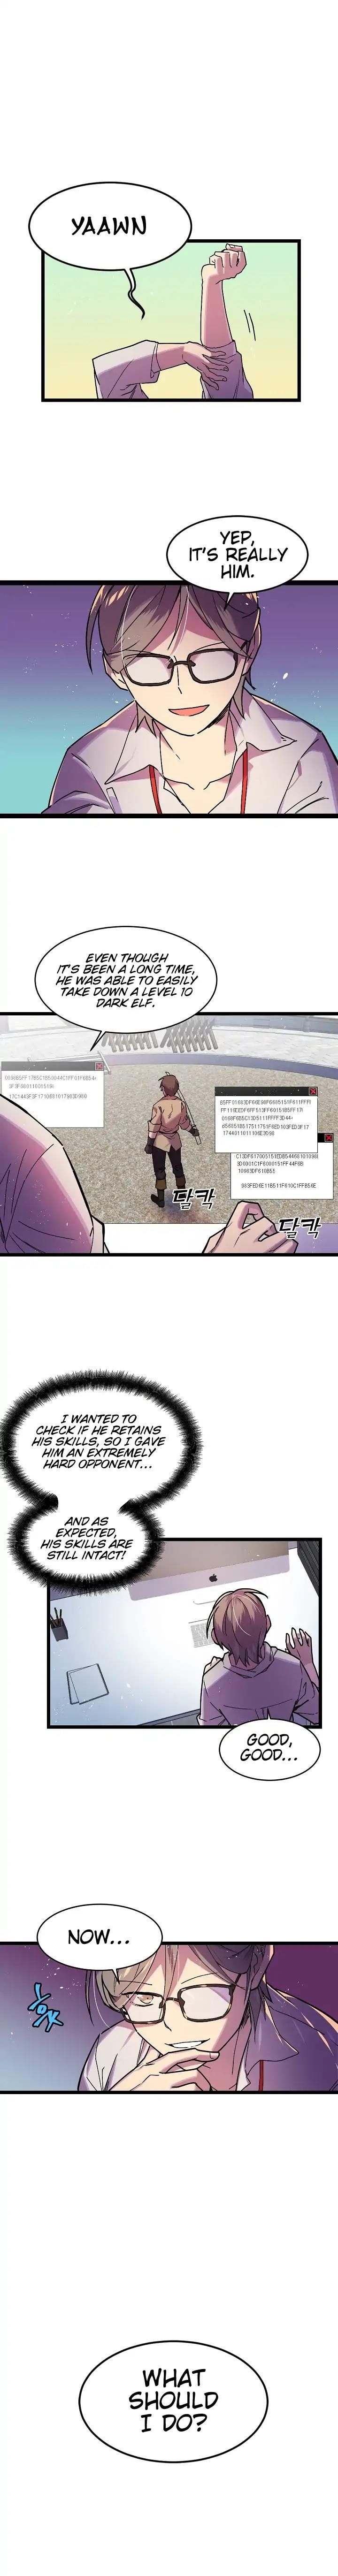 Ranker's Return Chapter 4 page 9